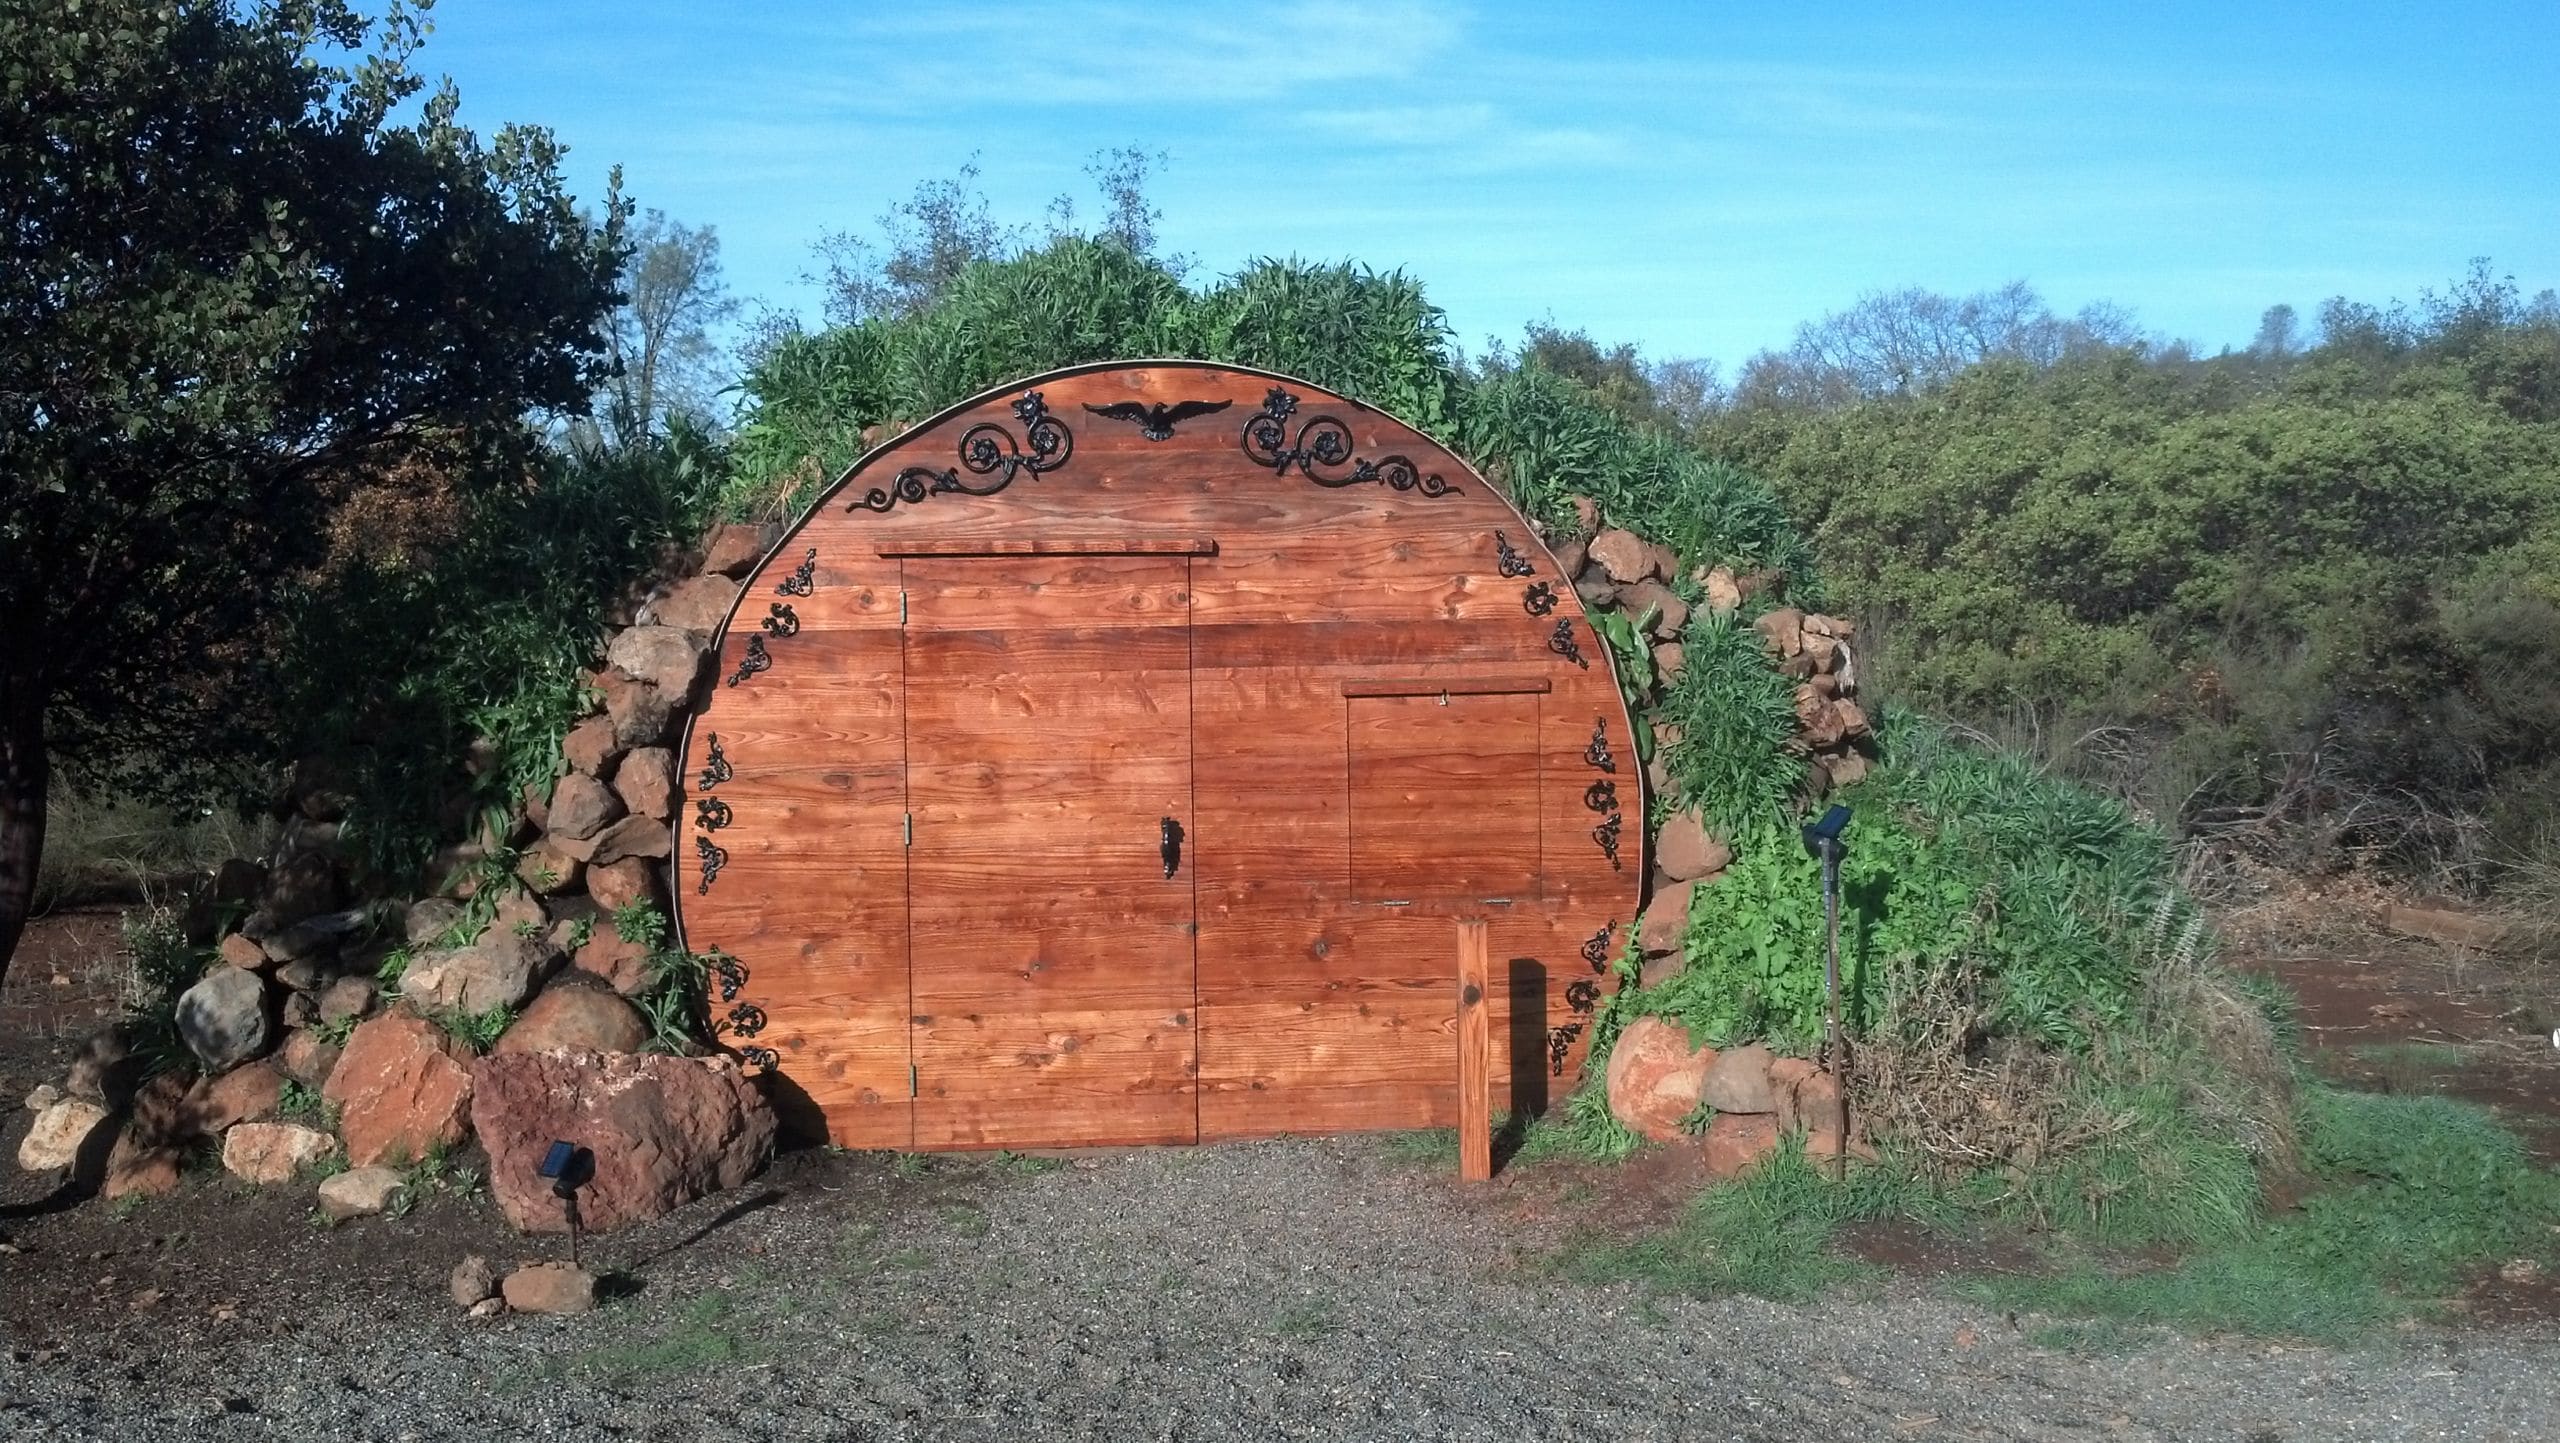 Hobbit Style DIY Wine Cellar: Submit Your Own Project Series | RMP